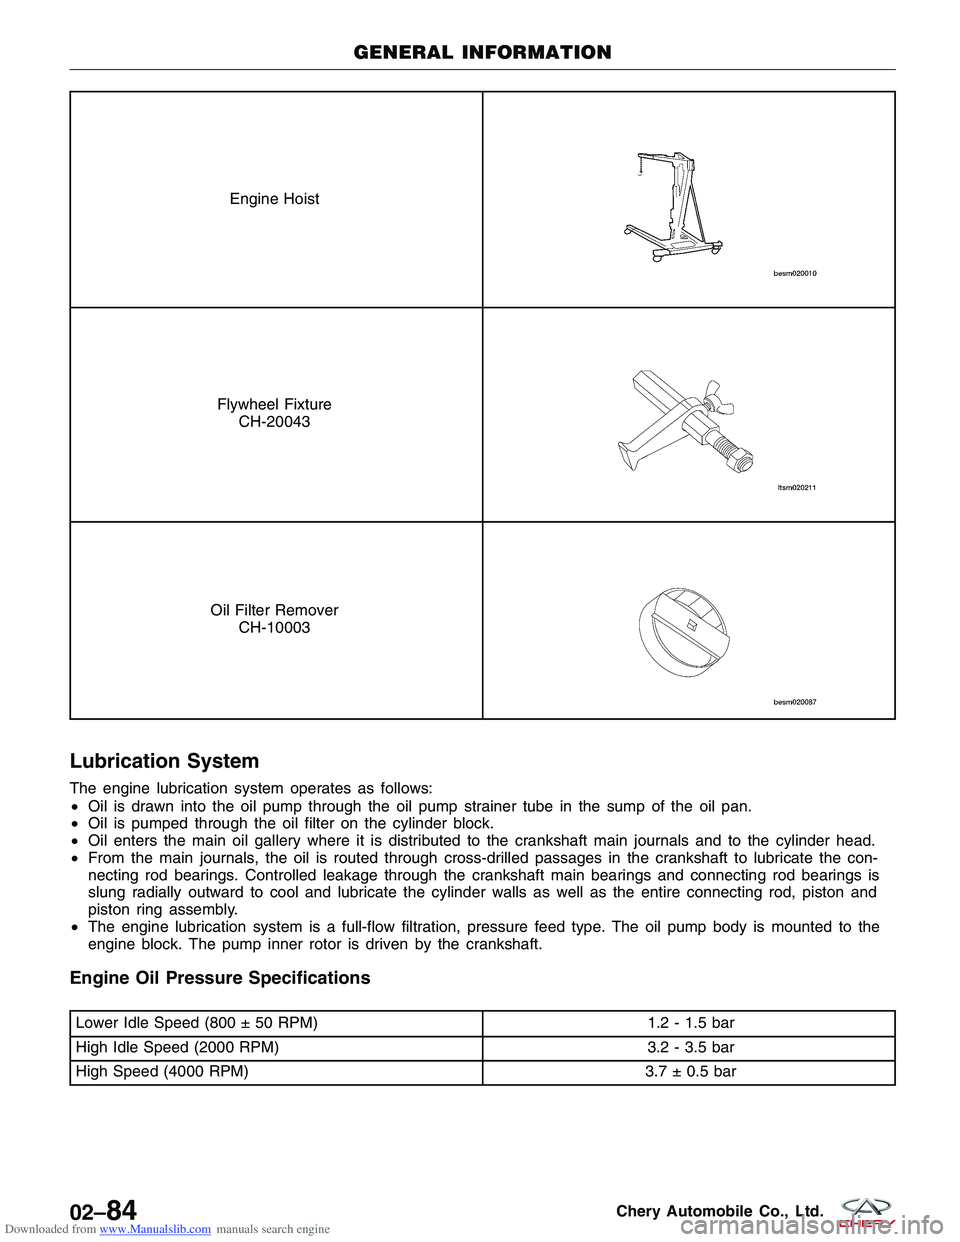 CHERY TIGGO 2009  Service Repair Manual Downloaded from www.Manualslib.com manuals search engine Engine Hoist
Flywheel FixtureCH-20043
Oil Filter Remover CH-10003
Lubrication System
The engine lubrication system operates as follows:
•Oil 